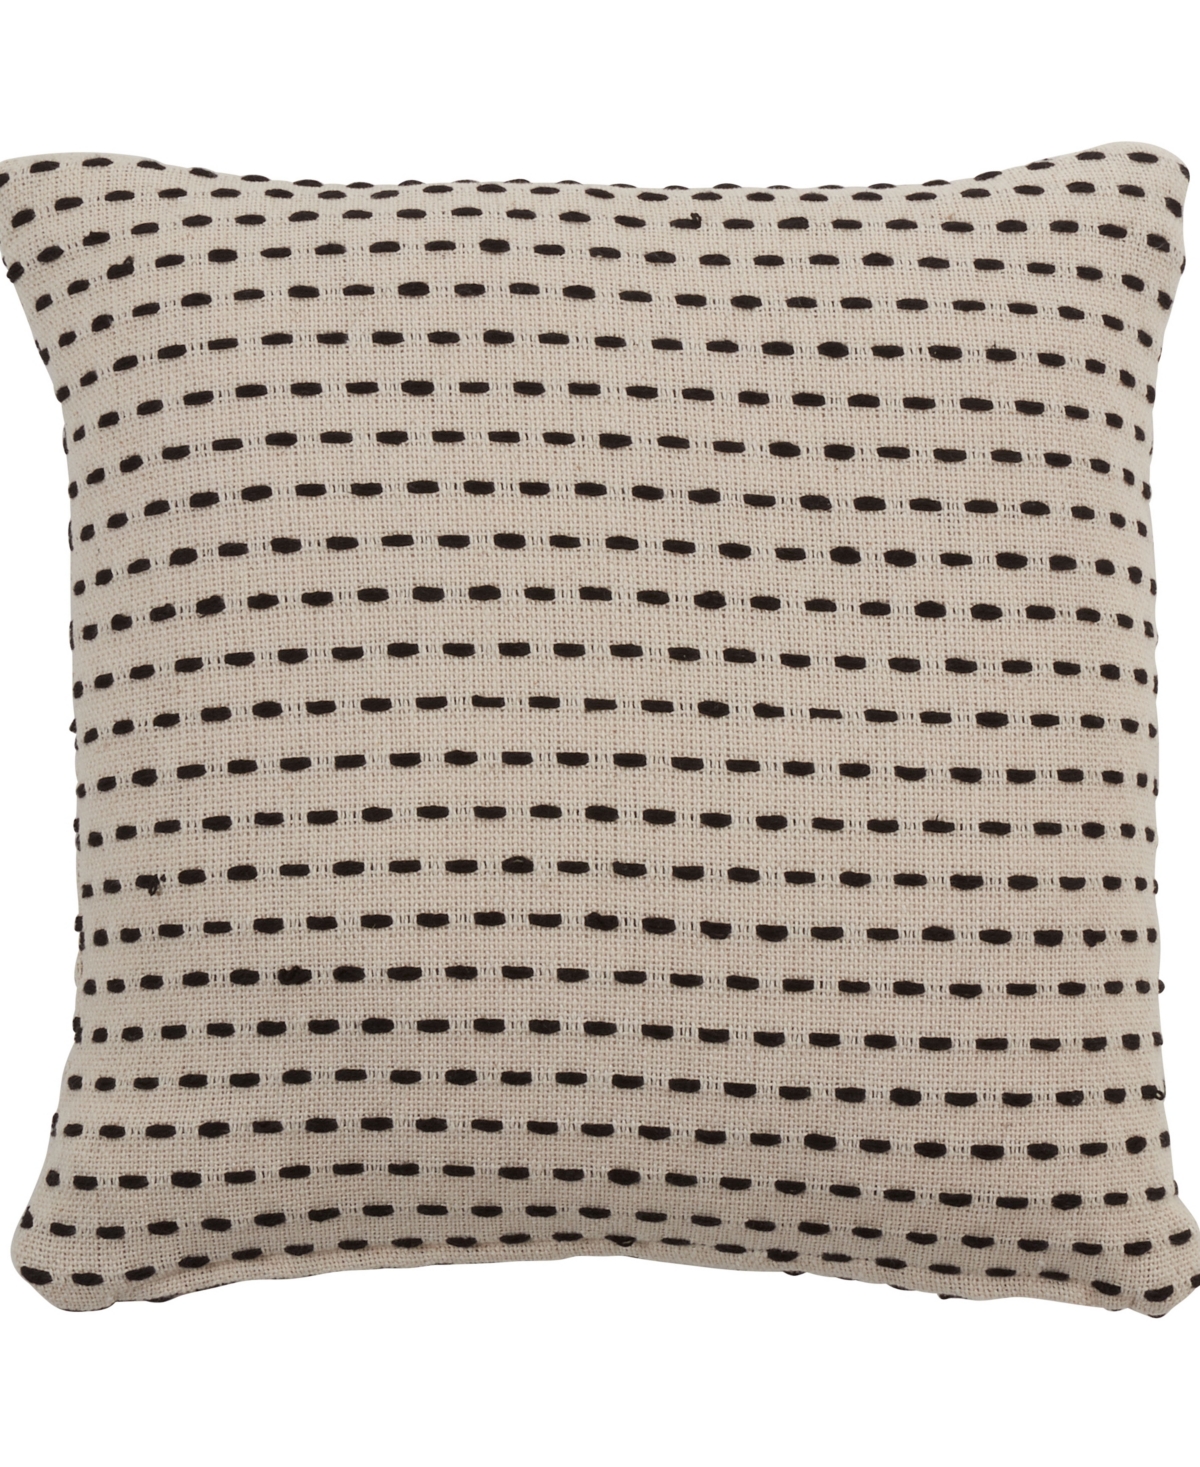 Saro Lifestyle Stitched Line Decorative Pillow, 18" X 18" In Ivory